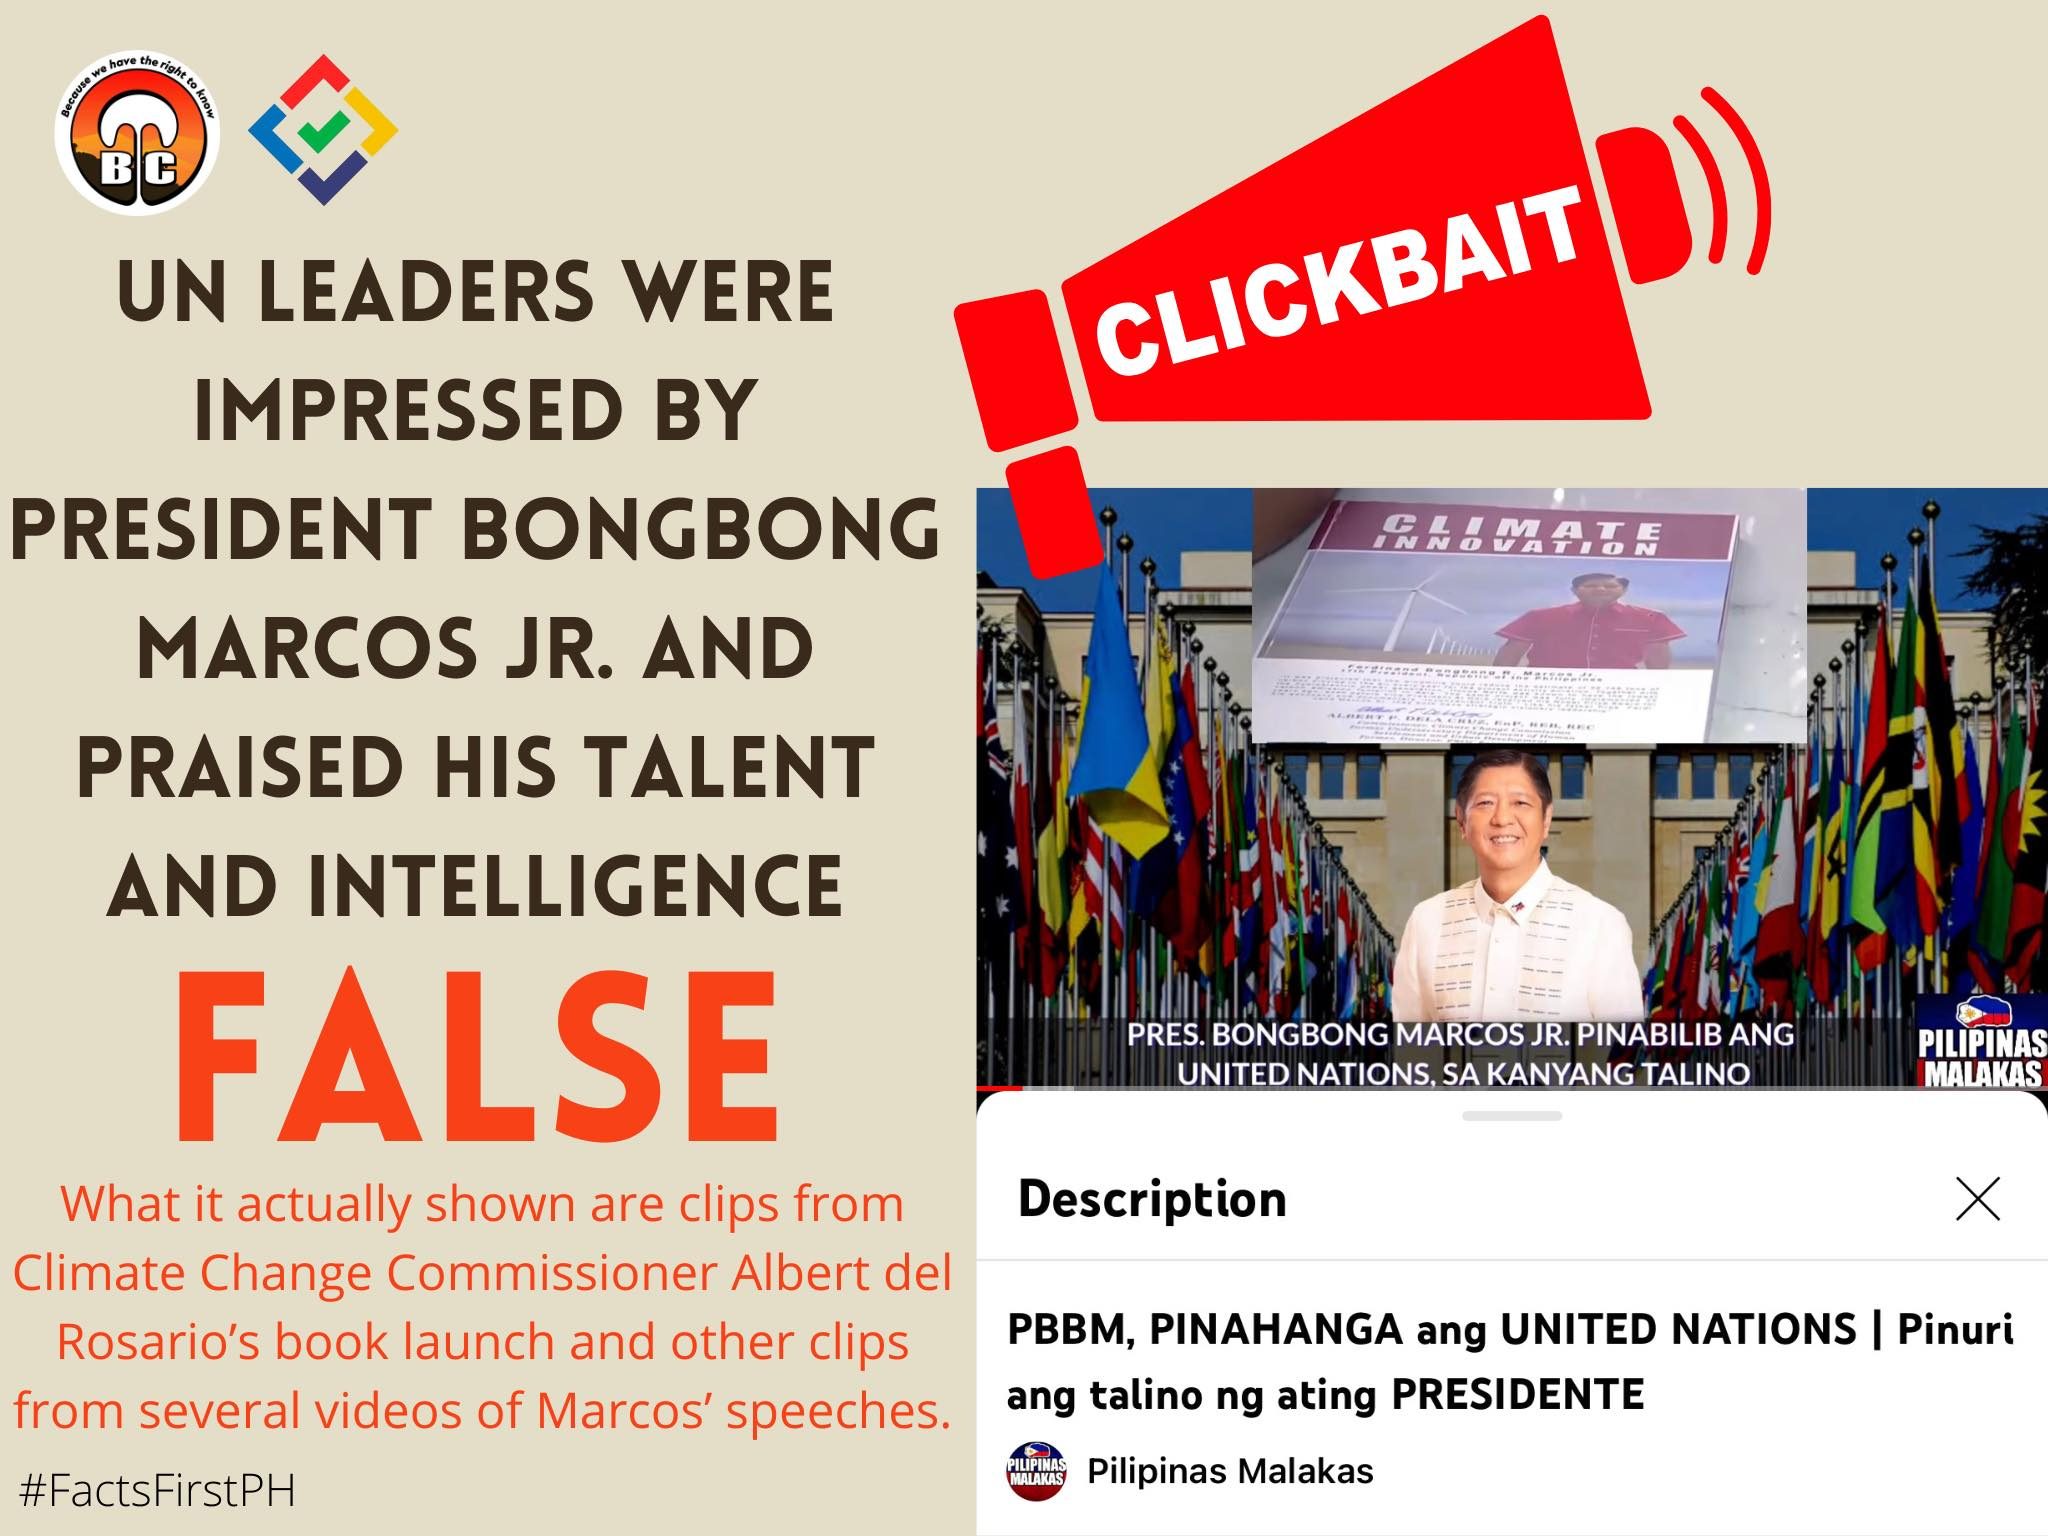 FACT CHECK: UN leaders were impressed by President Bongbong Marcos Jr. and praised his talent and intelligence #FactsFirstPH